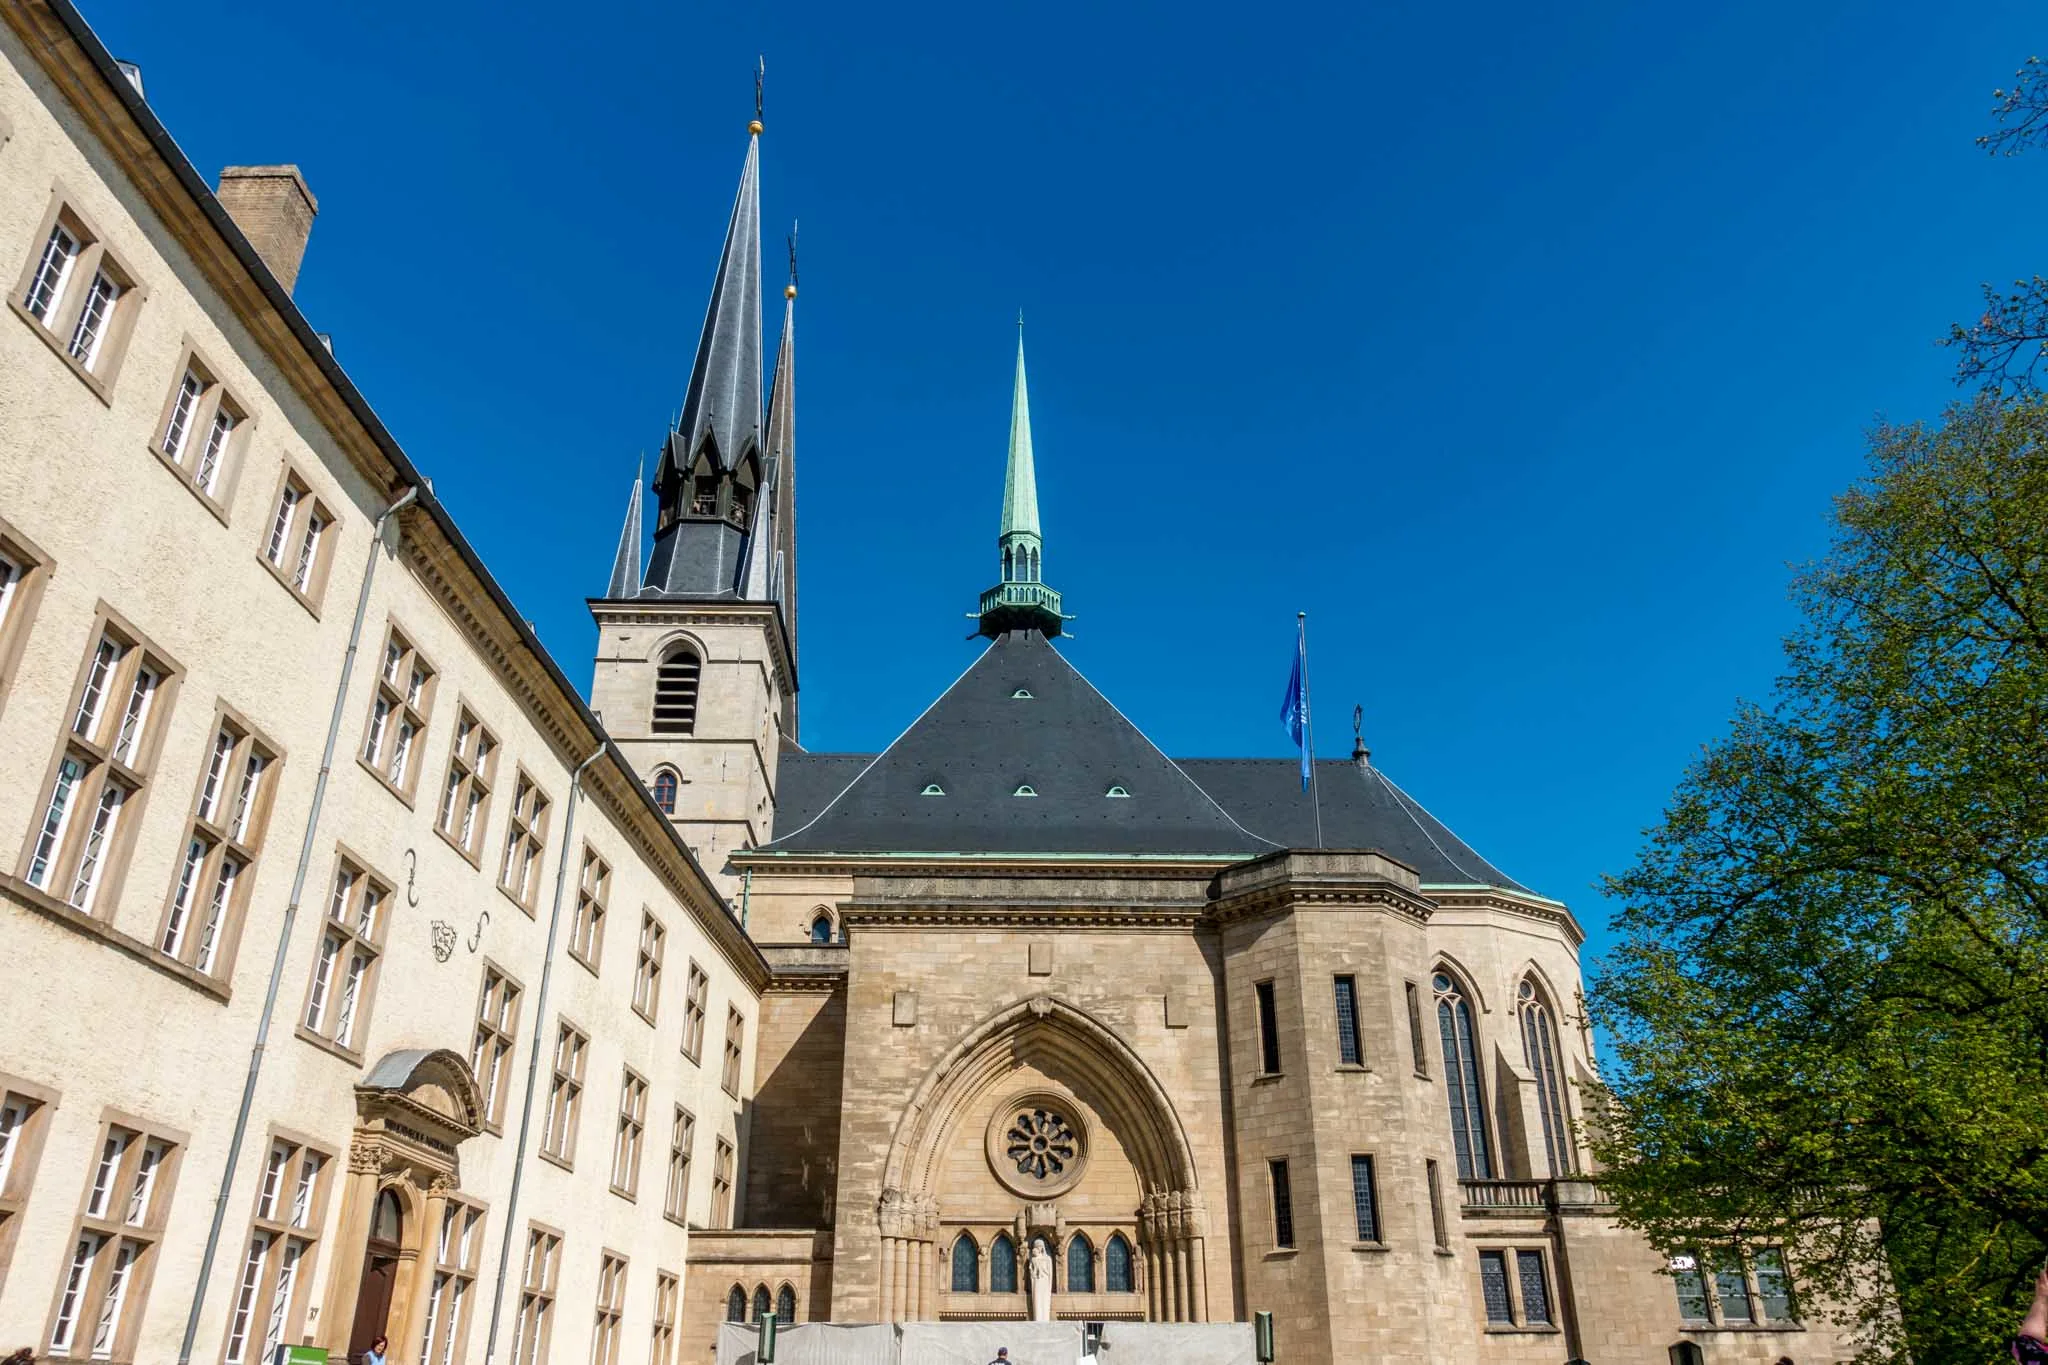 Exterior of cathedral with tall spires